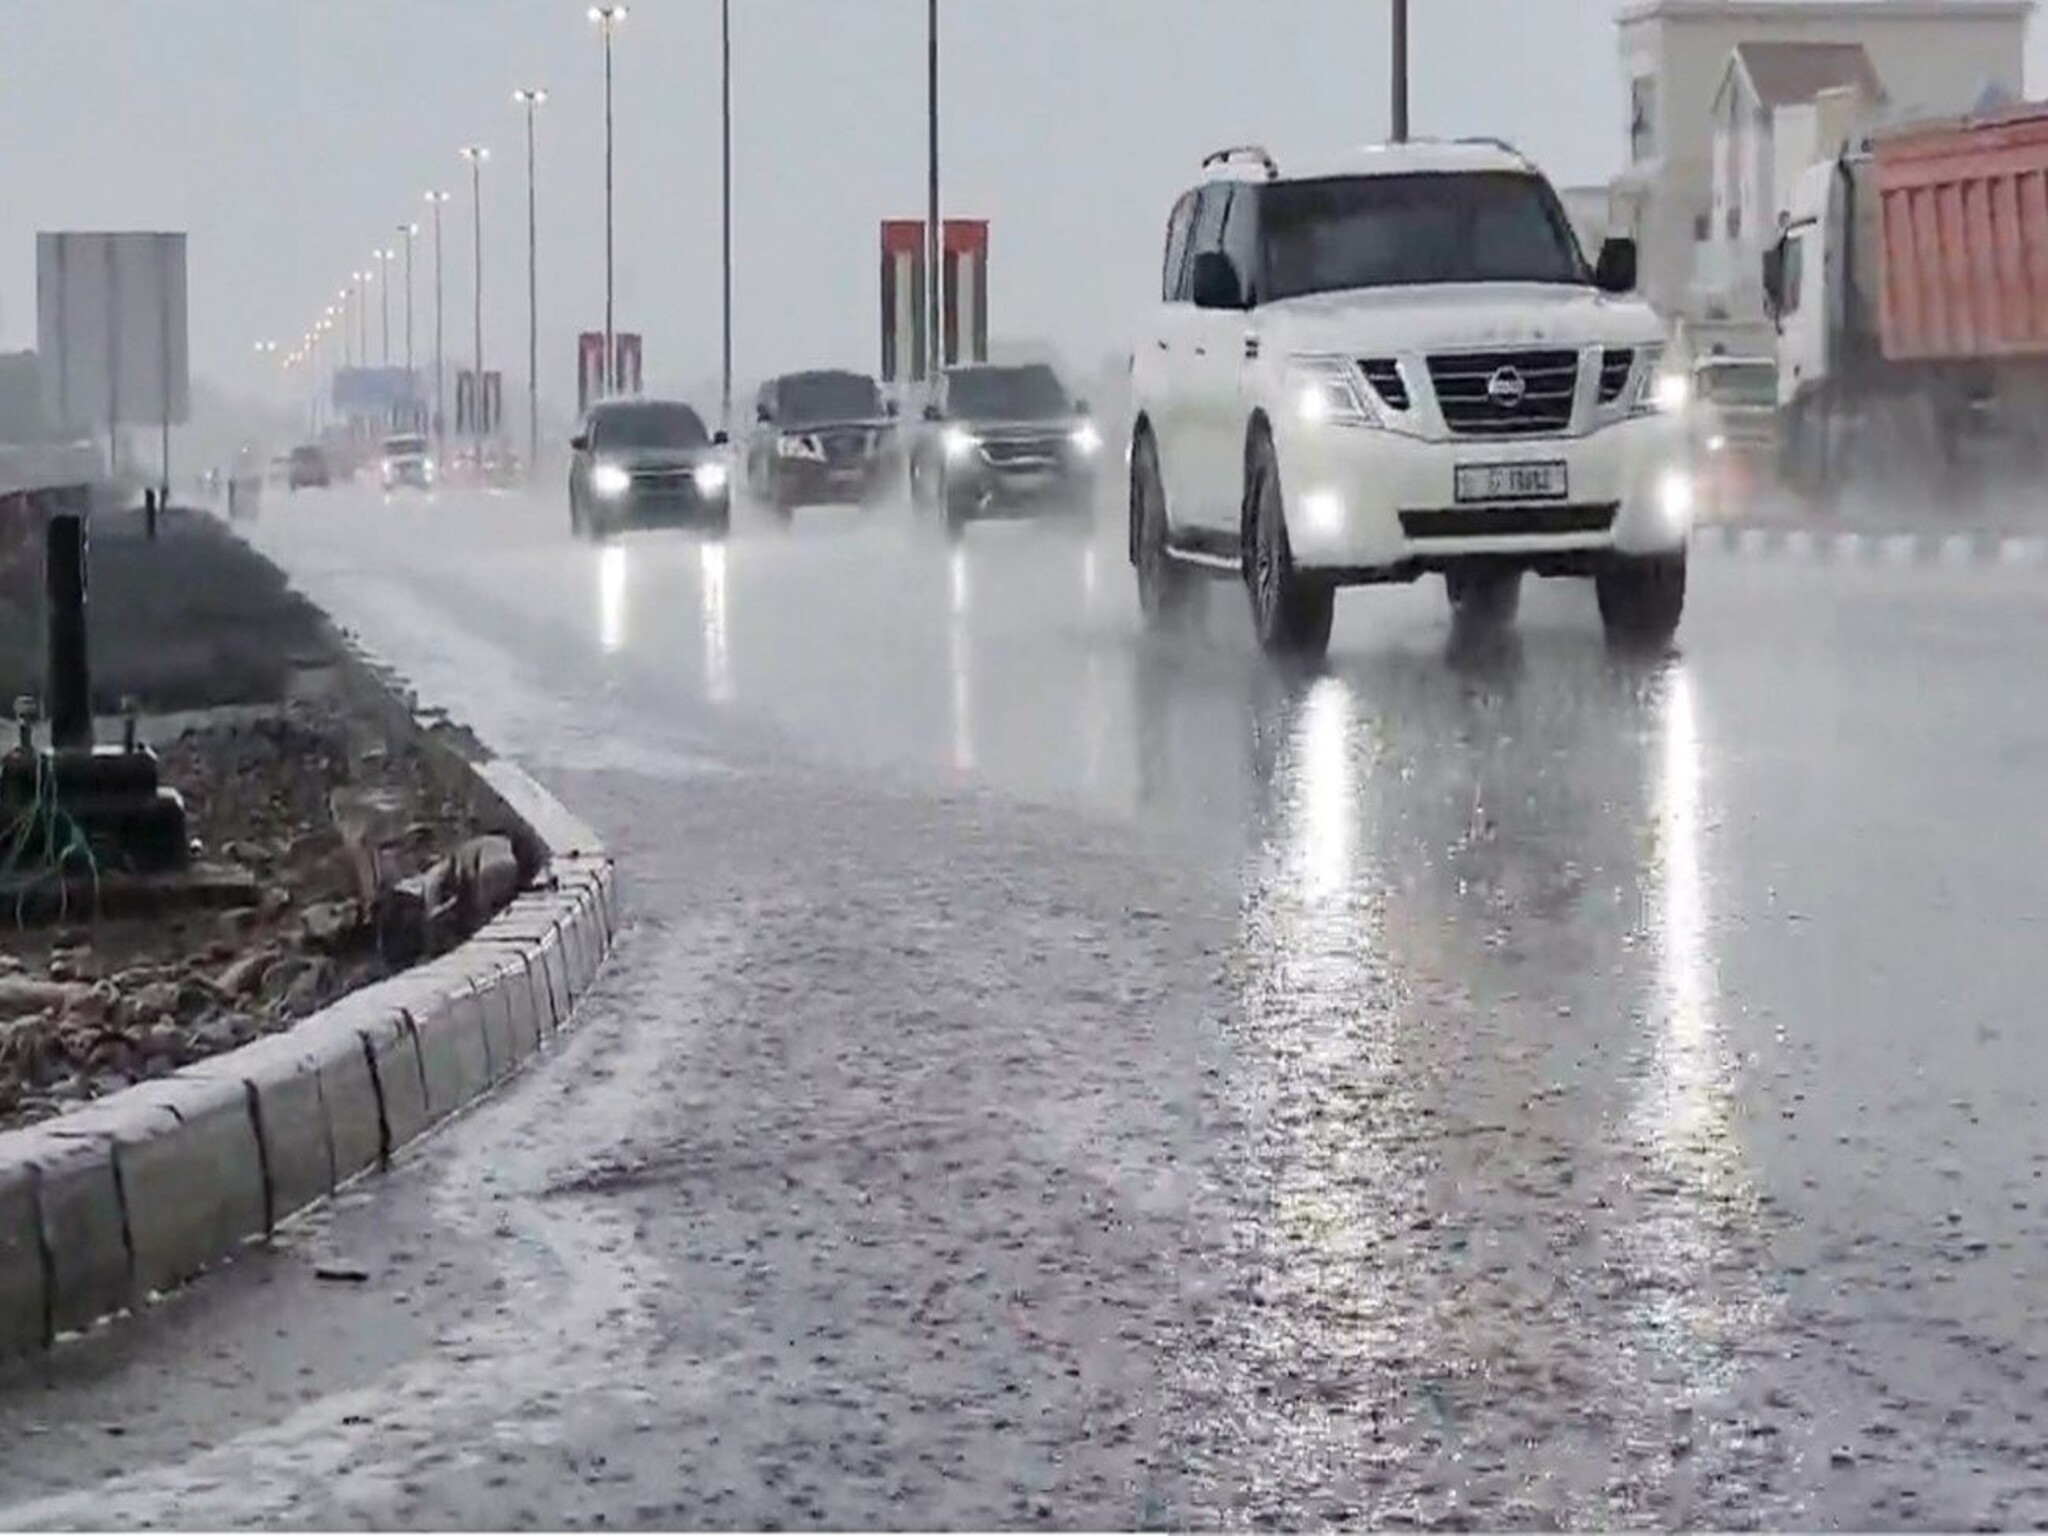 The UAE announces the end date for unstable weather conditions